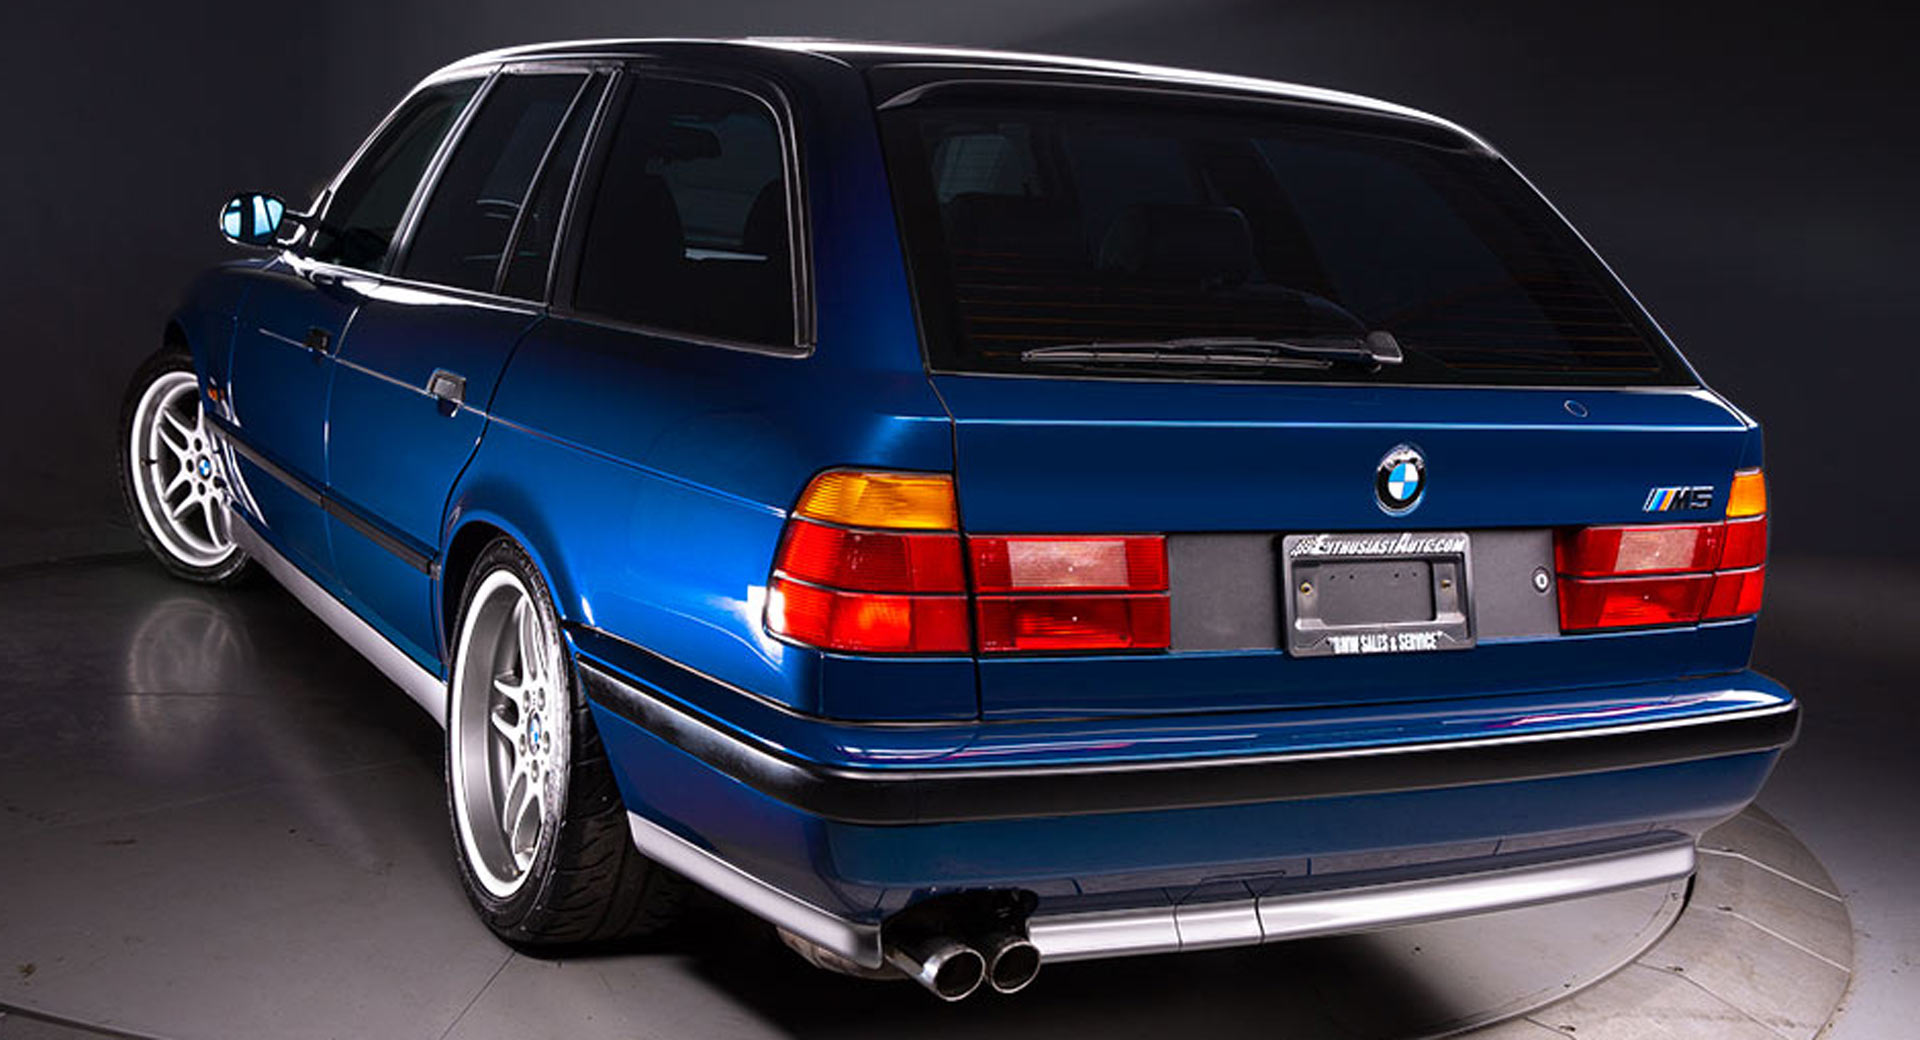 There's A Stunning 1994 BMW E34 M5 Touring For Sale In The States